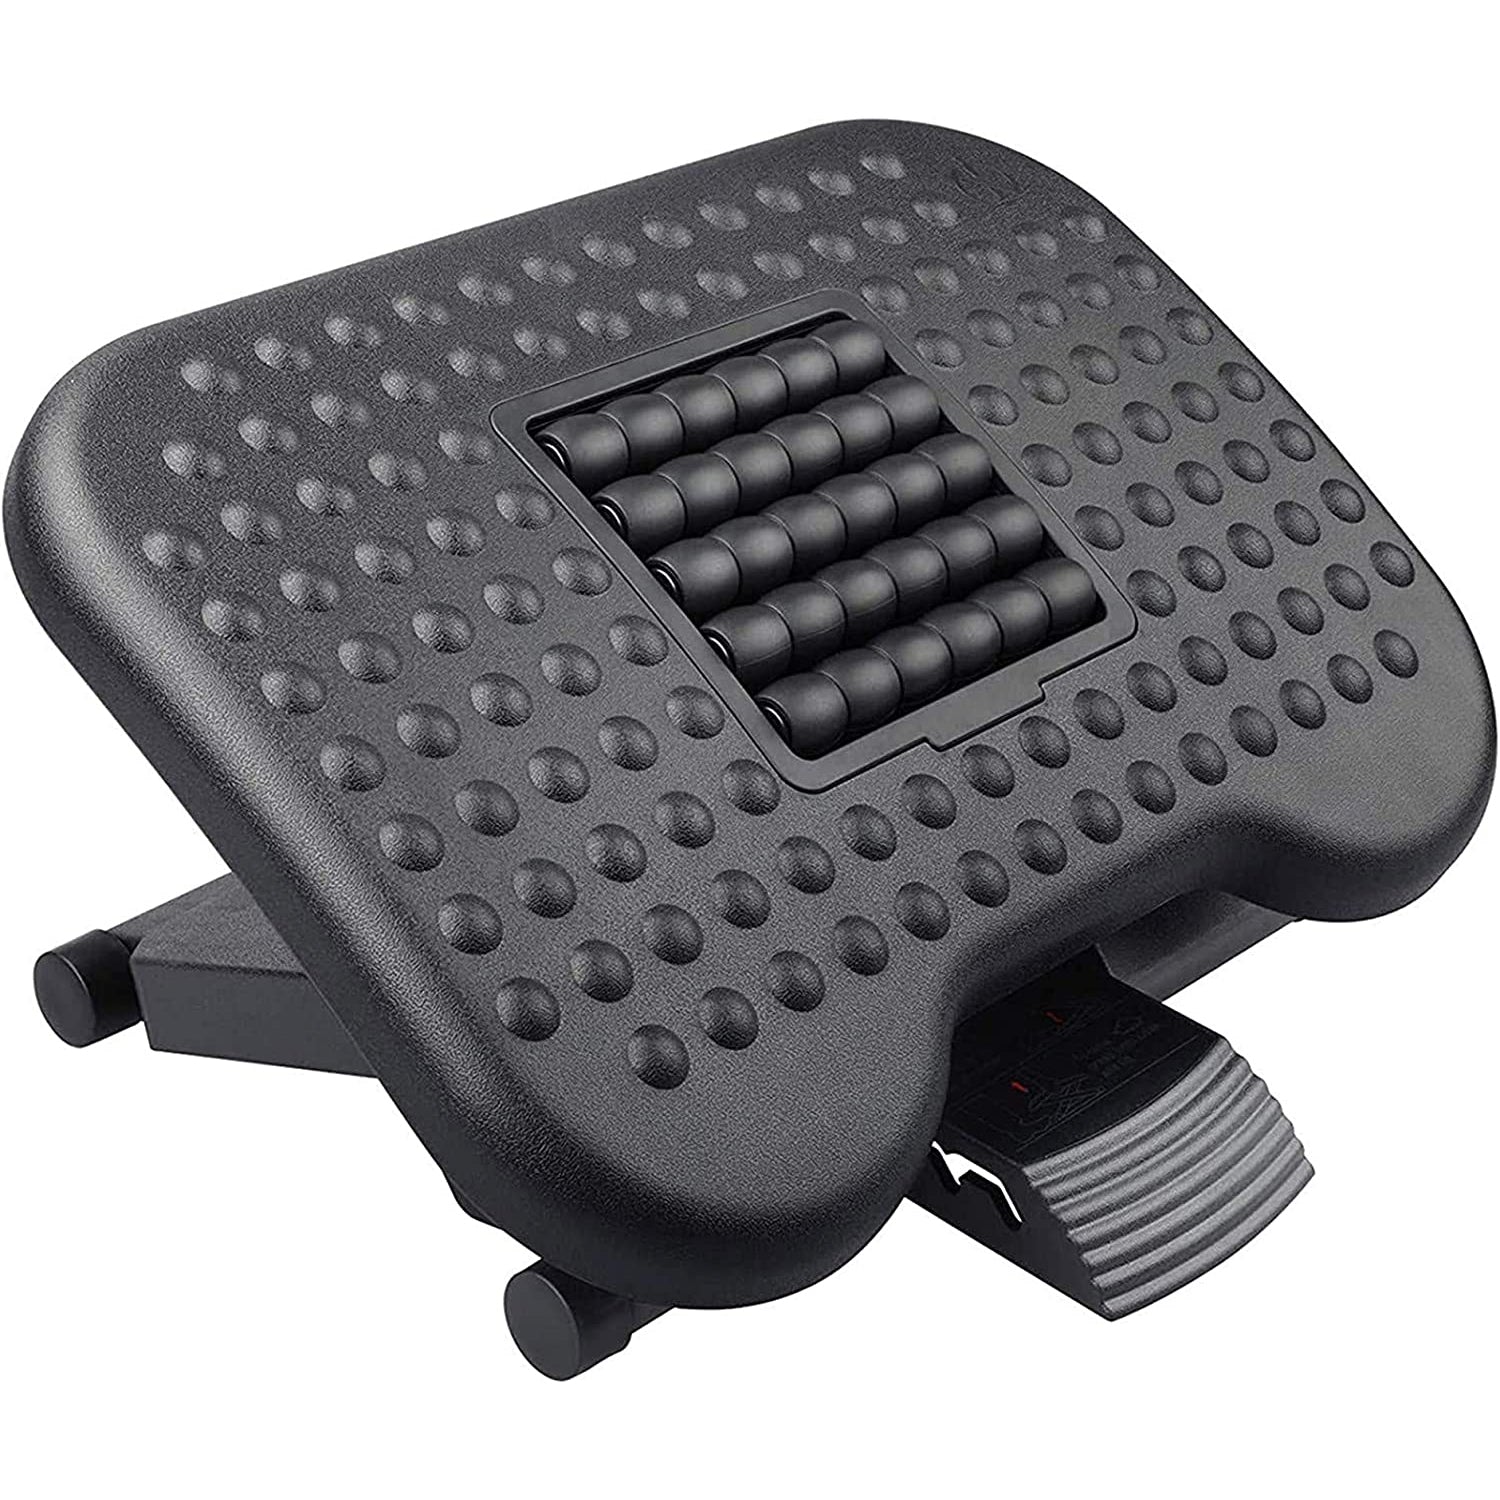 http://www.huanuo.com/cdn/shop/products/HUANUO-Footrest-Under-Desk---Adjustable-Foot-Rest-with-Massage-Texture-and-Roller_-Ergonomic-Foot-Rest-with-3-Height-Position_-30-Degree-Tilt-Angle-Adjustment-for-Home_-Office-0.jpg?v=1668512525